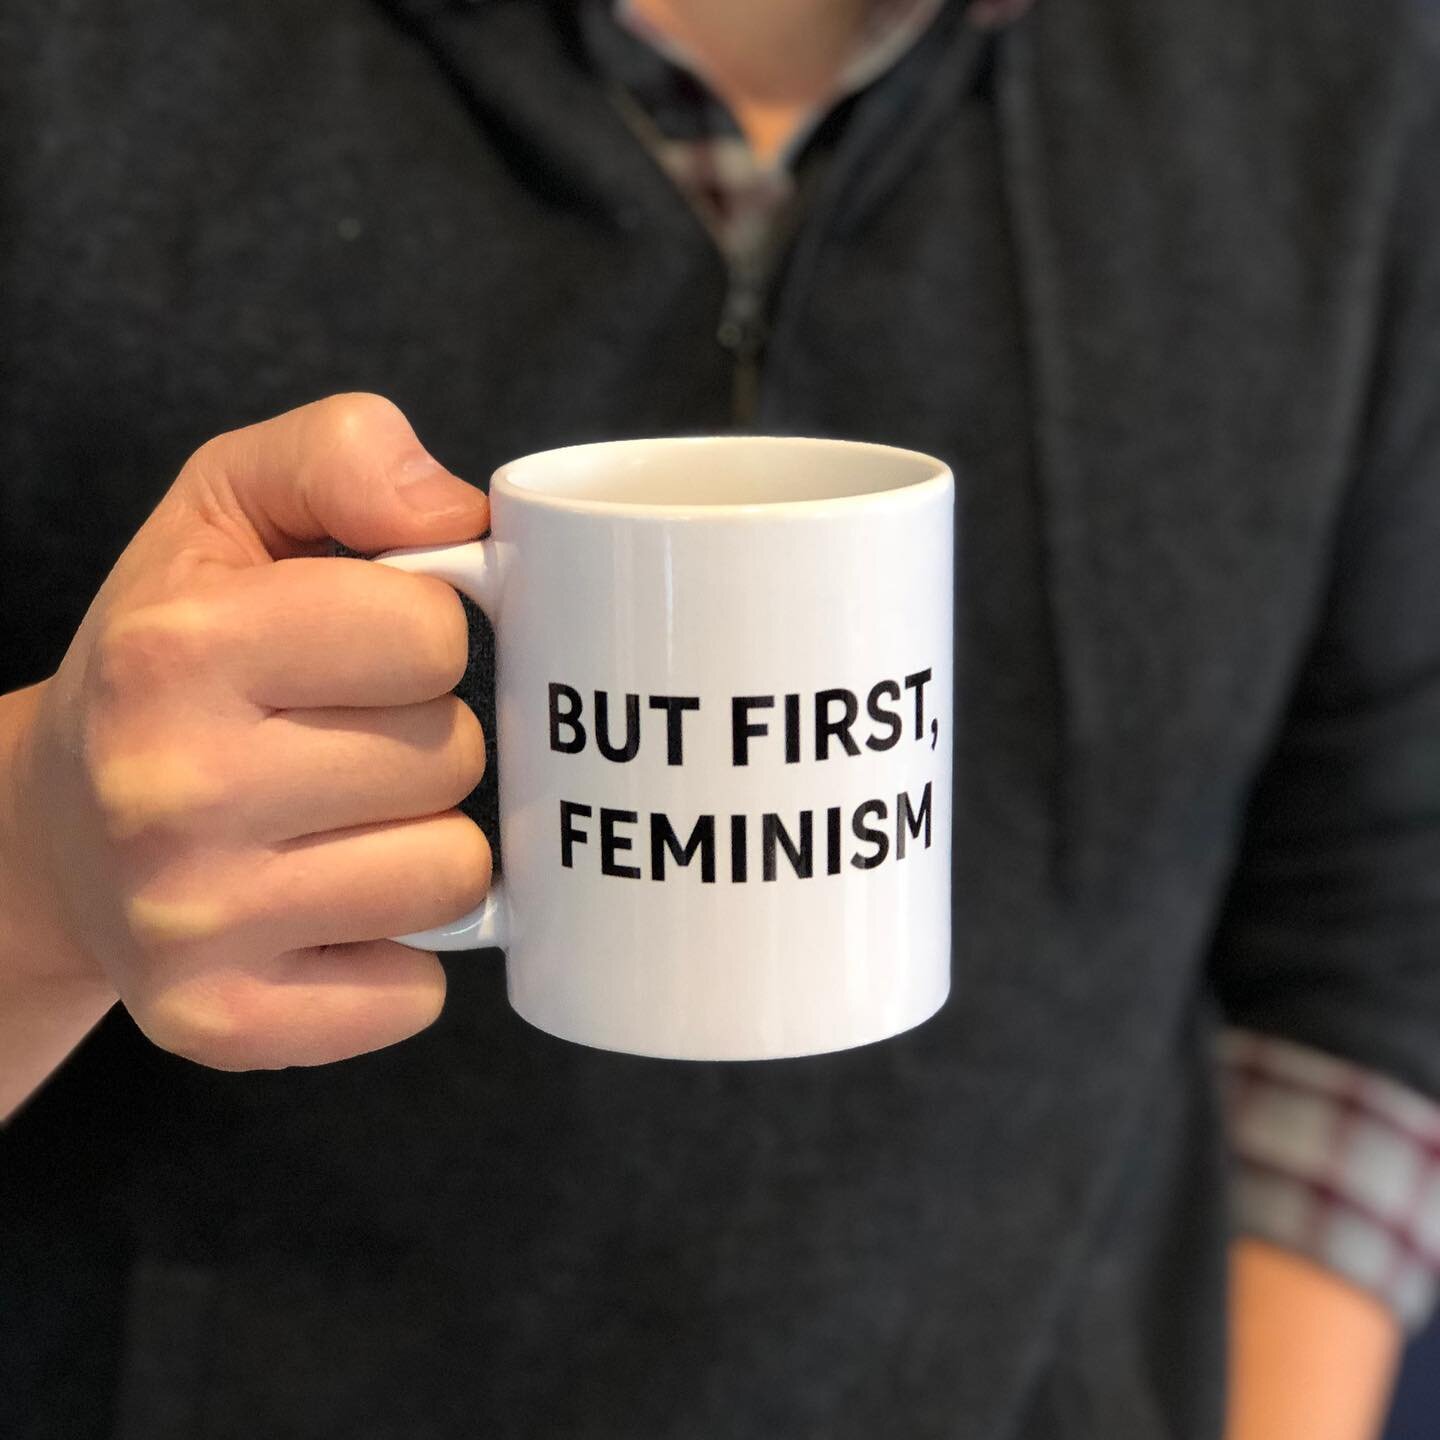 Y'all seem to dig our mugs! We know choosing a favorite is like asking you to pick your favorite child (out loud 😜), but which of these mugs are you absolutely in love with?⁠⠀
⁠⠀
💪Feminism⁠⠀
📔Vogue⁠⠀
☀️Best Day⁠⠀
🎵No Diggity⁠⠀
🐑Llama⁠⠀
😉Sarcasm